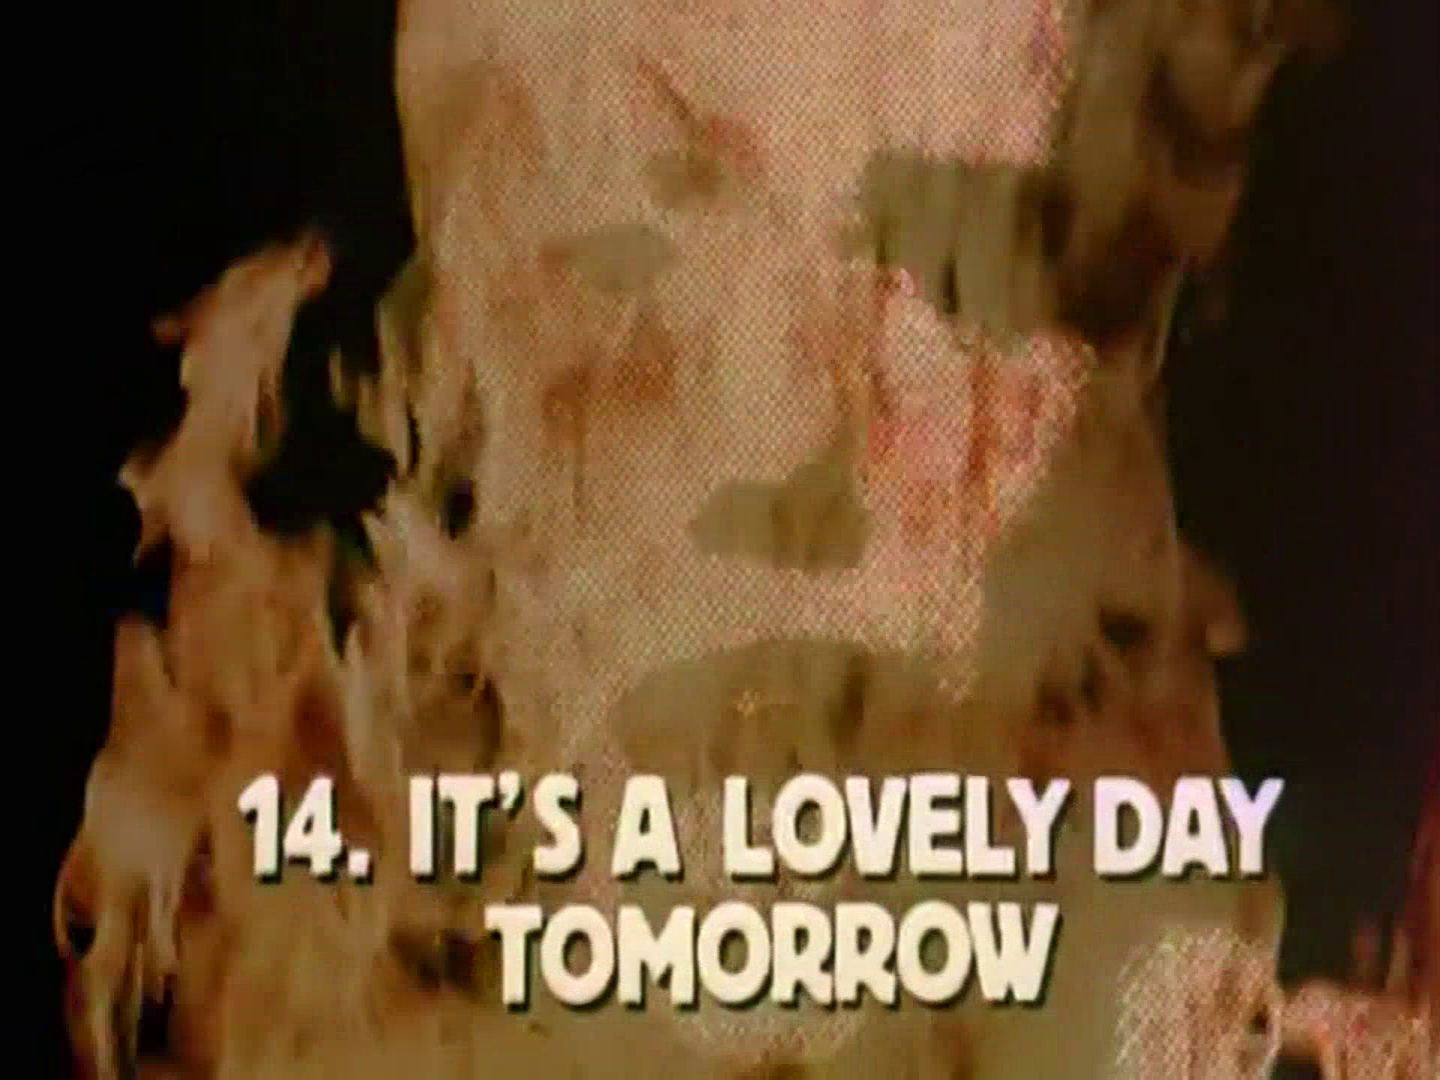 Main title from the 1974 ‘It’s a Lovely Day Tomorrow’ episode of The World at War (1973-74) (1)